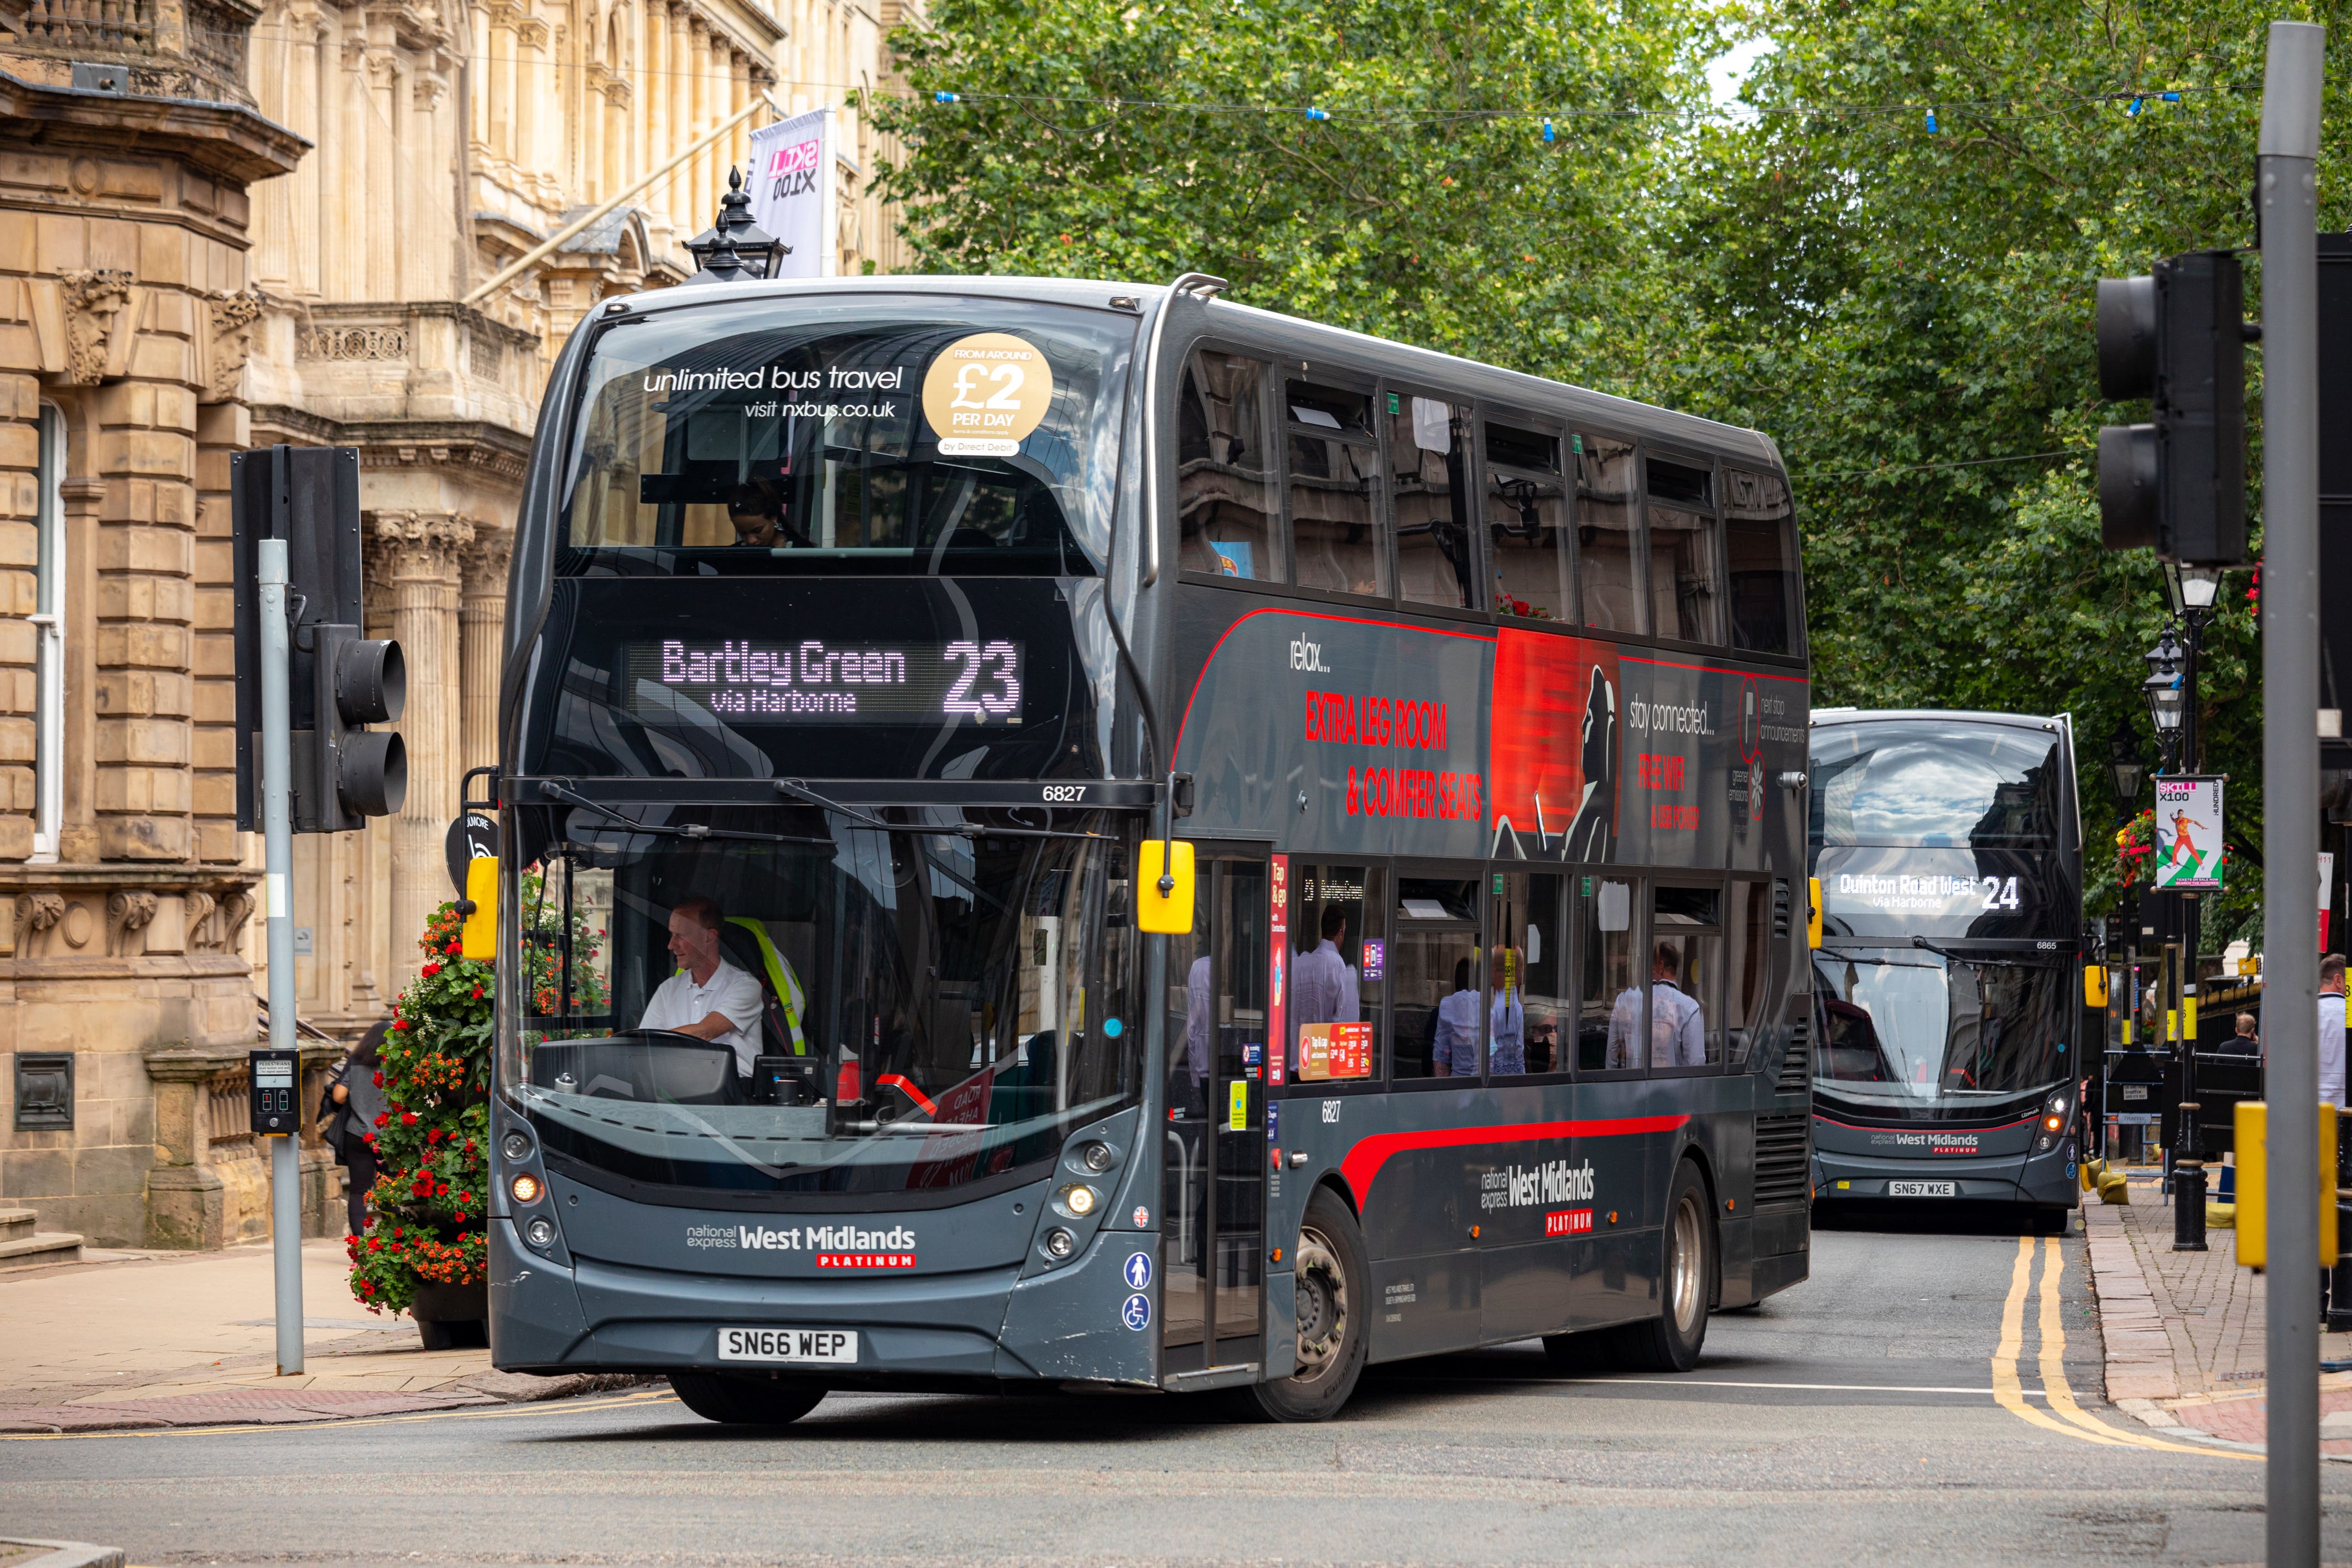 National Express buses in action in Colmore Row, Birmingham (Shaun Fellows/Shine Pix Ltd)